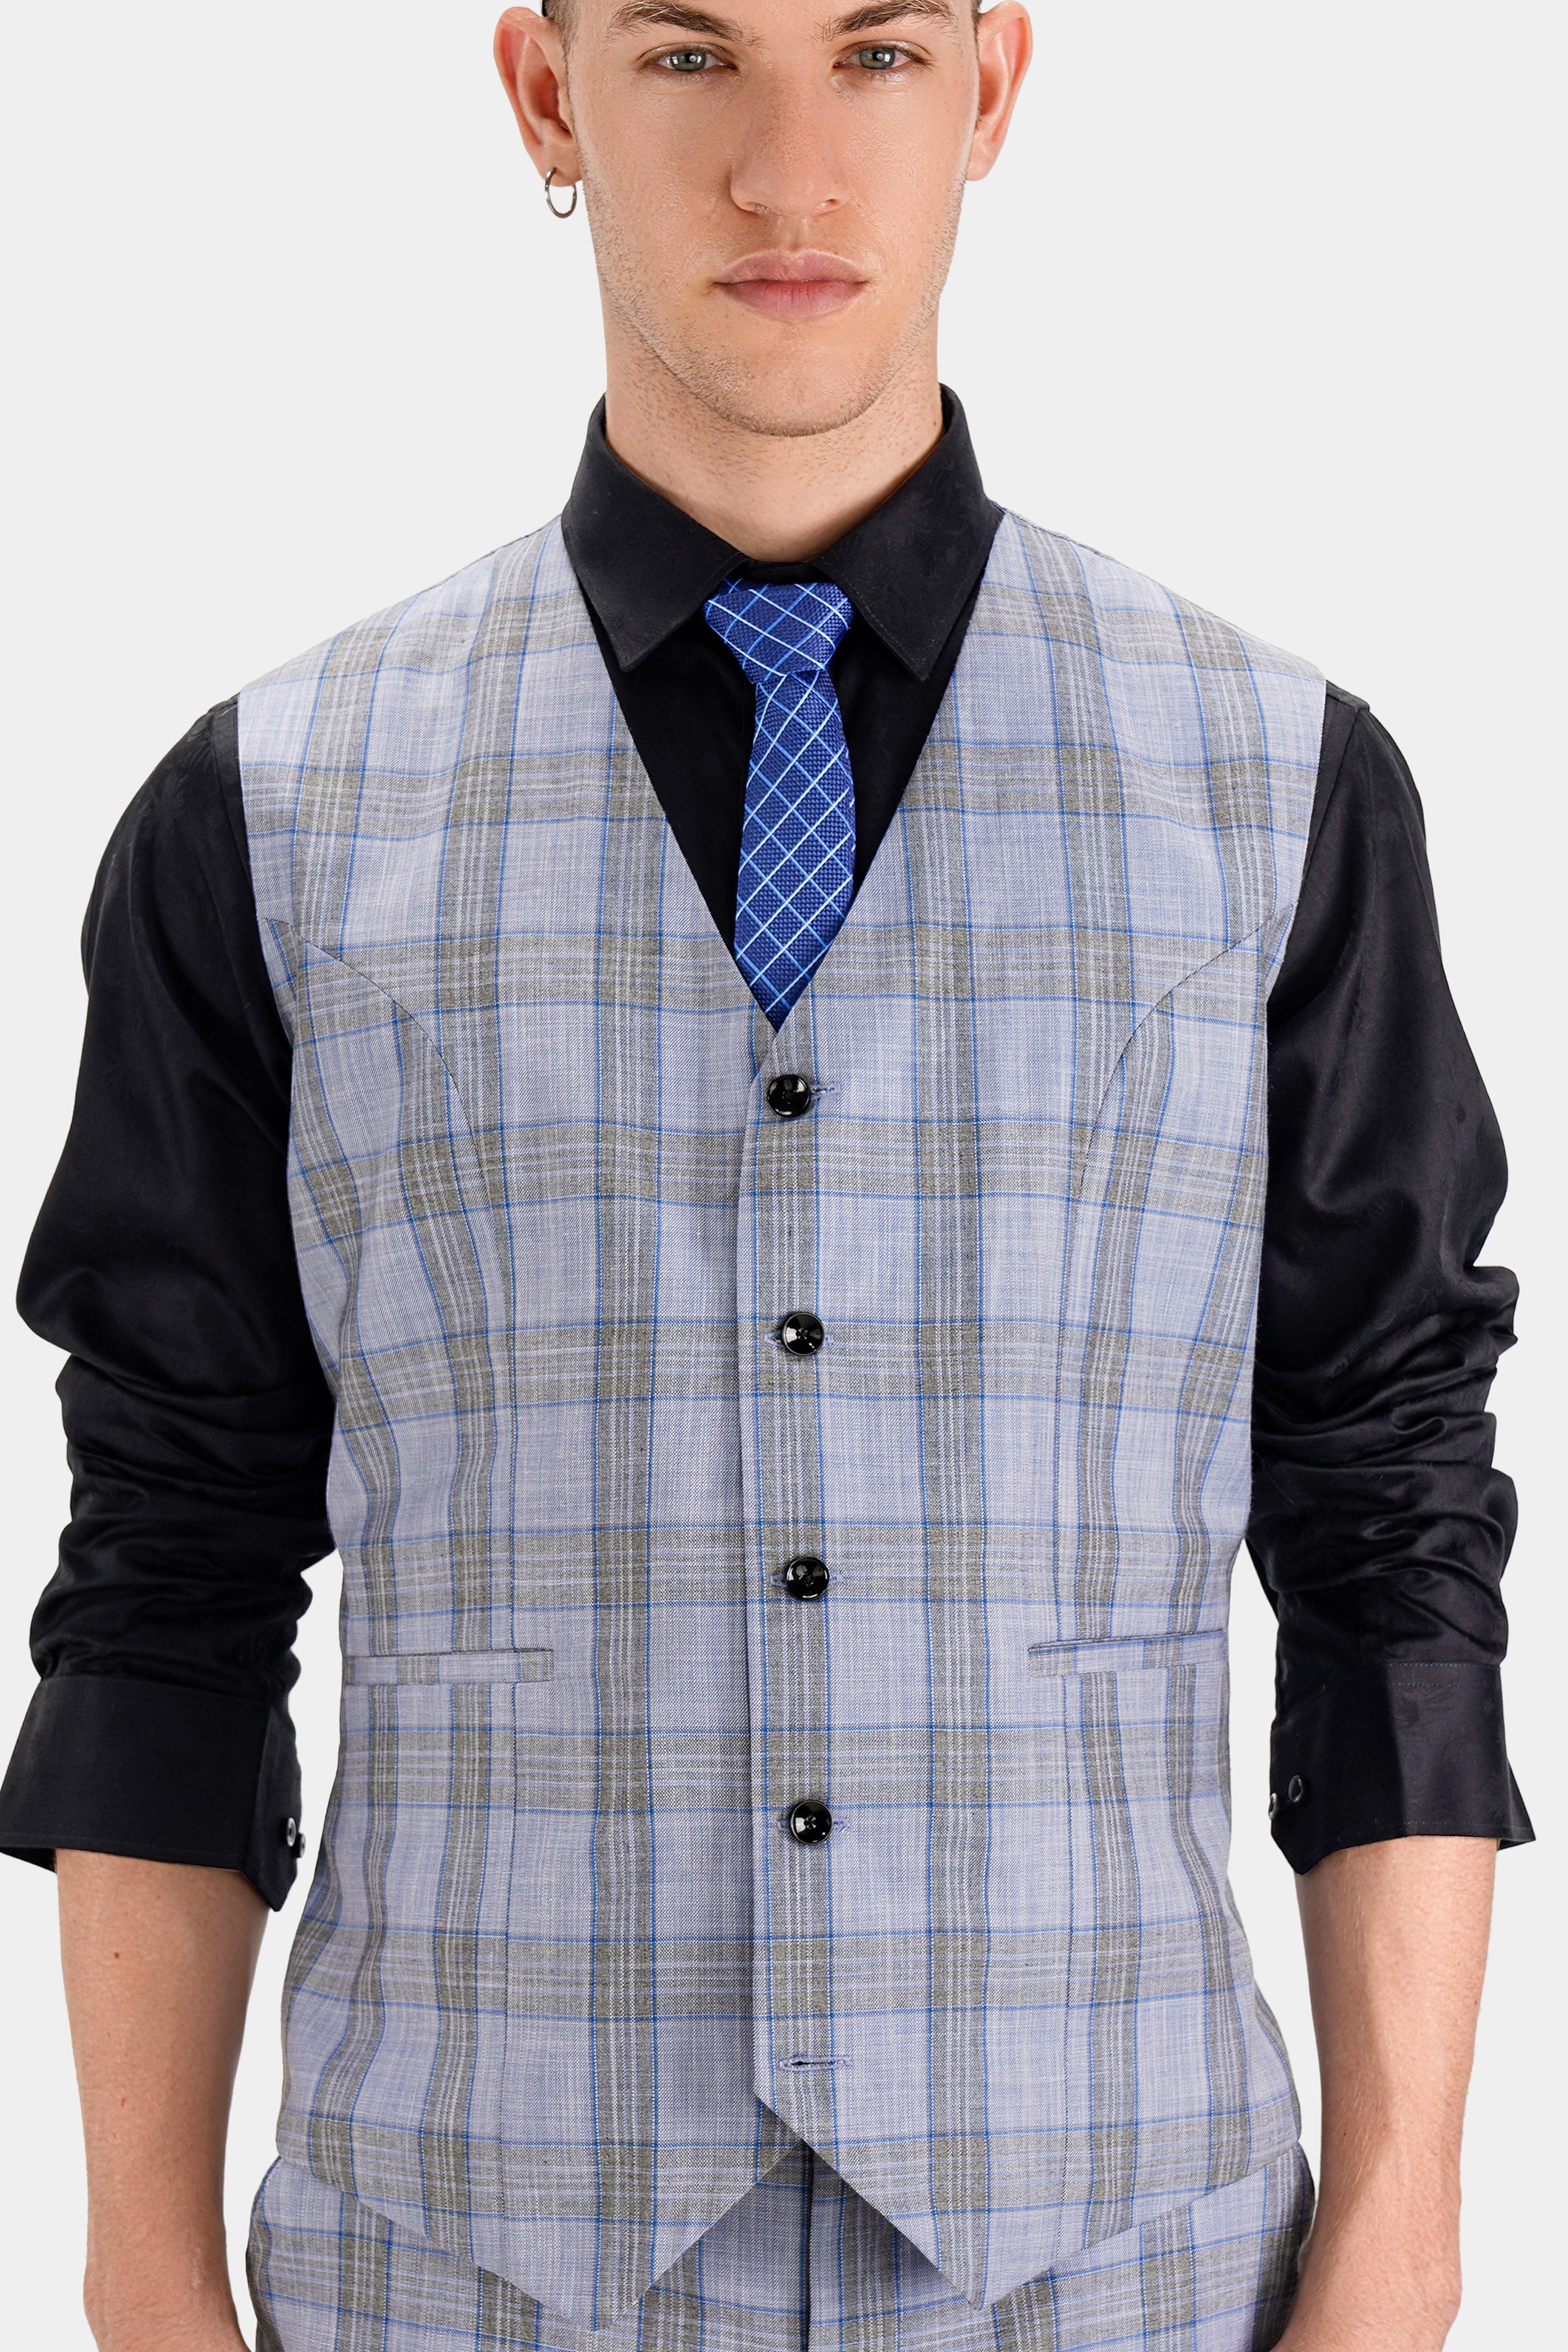 Slate Gray with Tapa Brown Plaid Wool Rich Waistcoat V2743-36, V2743-38, V2743-40, V2743-42, V2743-44, V2743-46, V2743-48, V2743-50, V2743-52, V2743-54, V2743-56, V2743-58, V2743-60